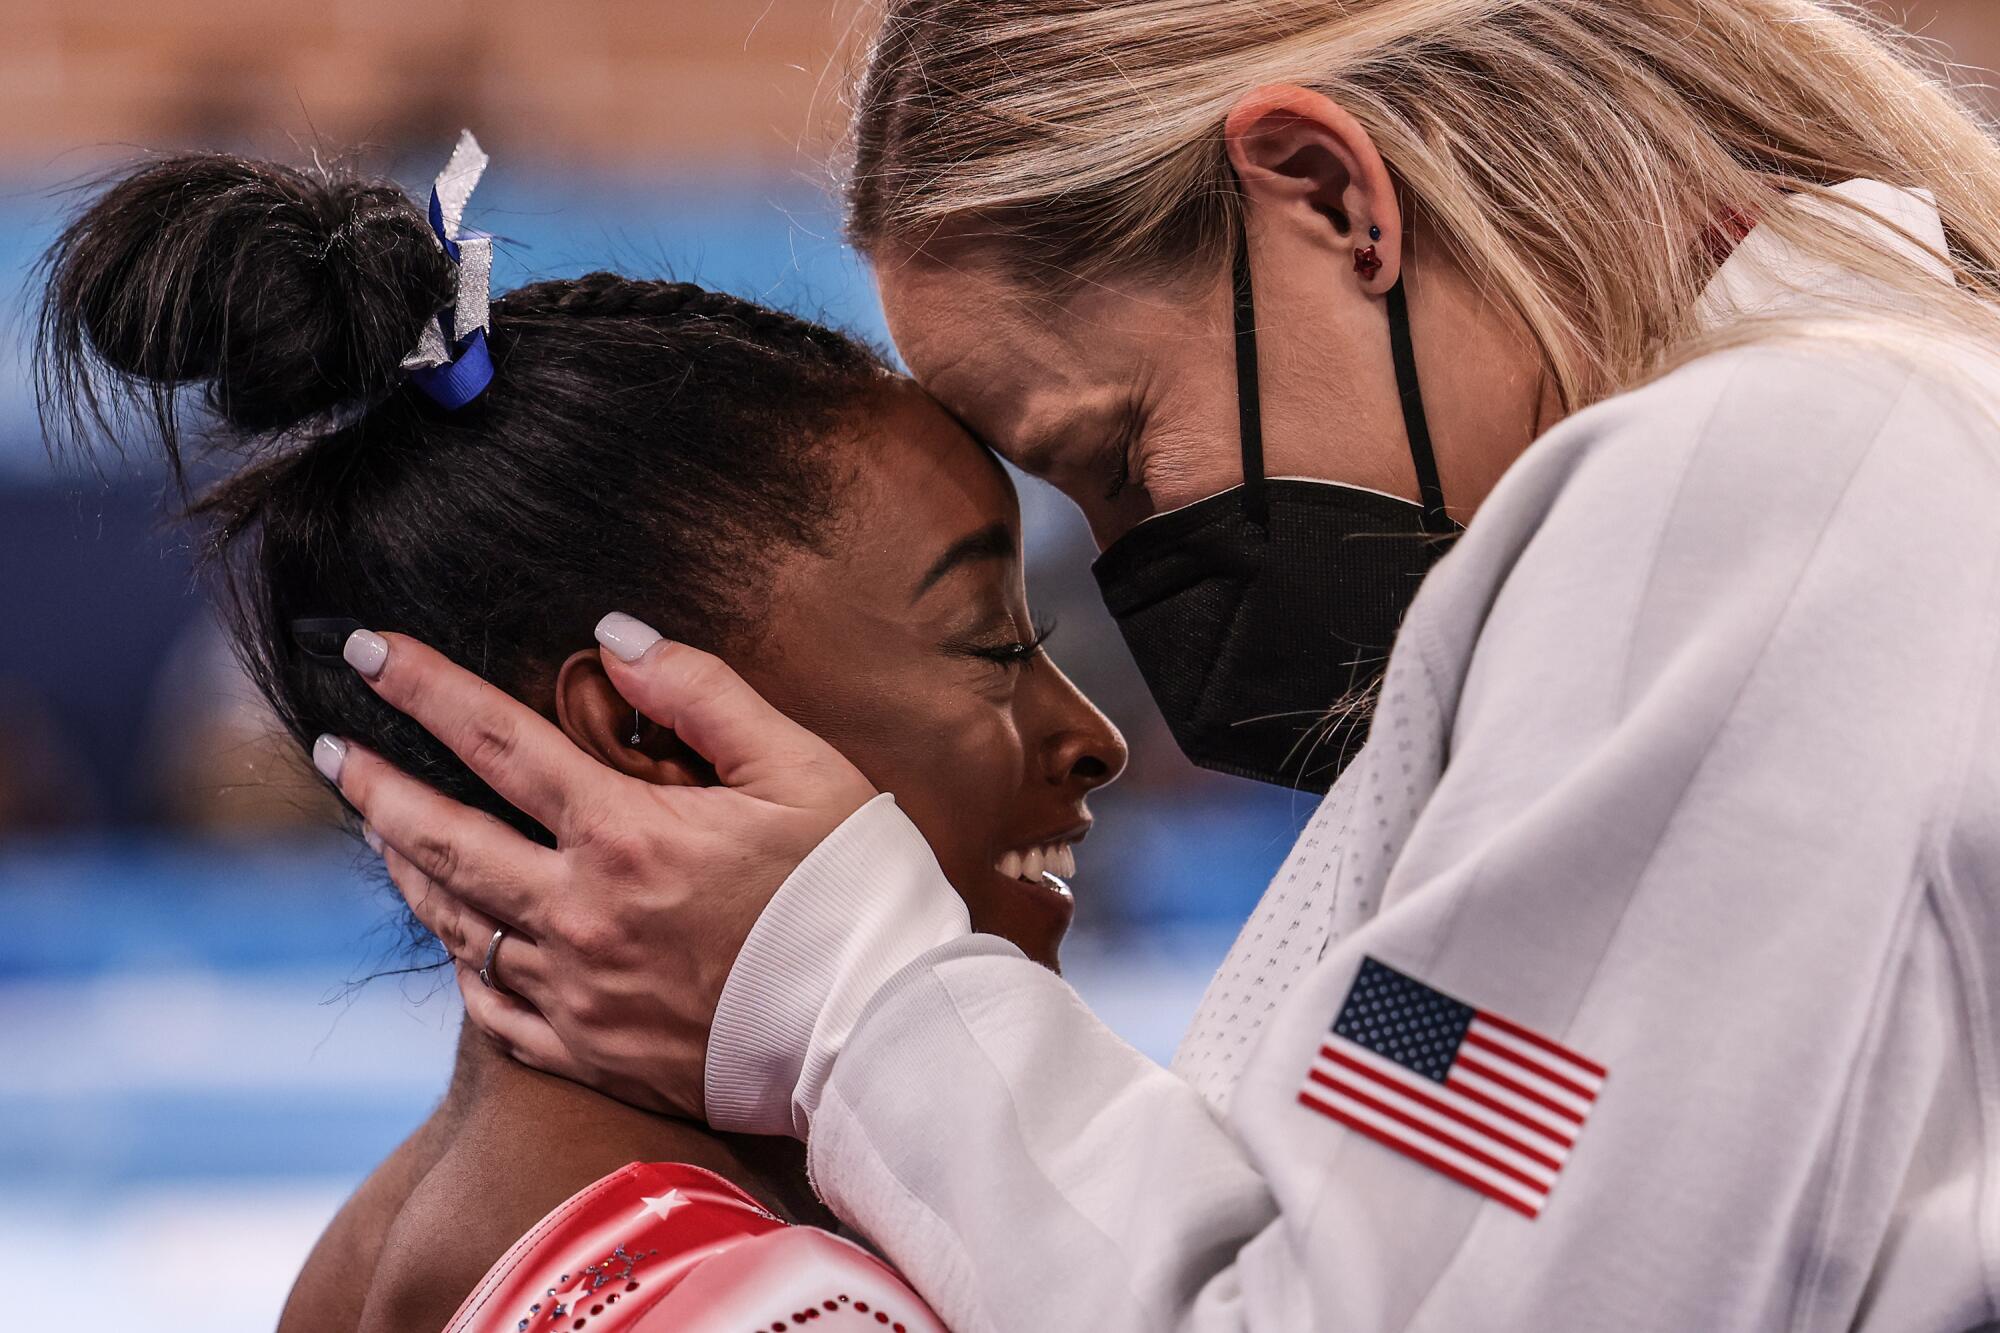 Cecile Landi presses her forehead to that of Simone Biles.